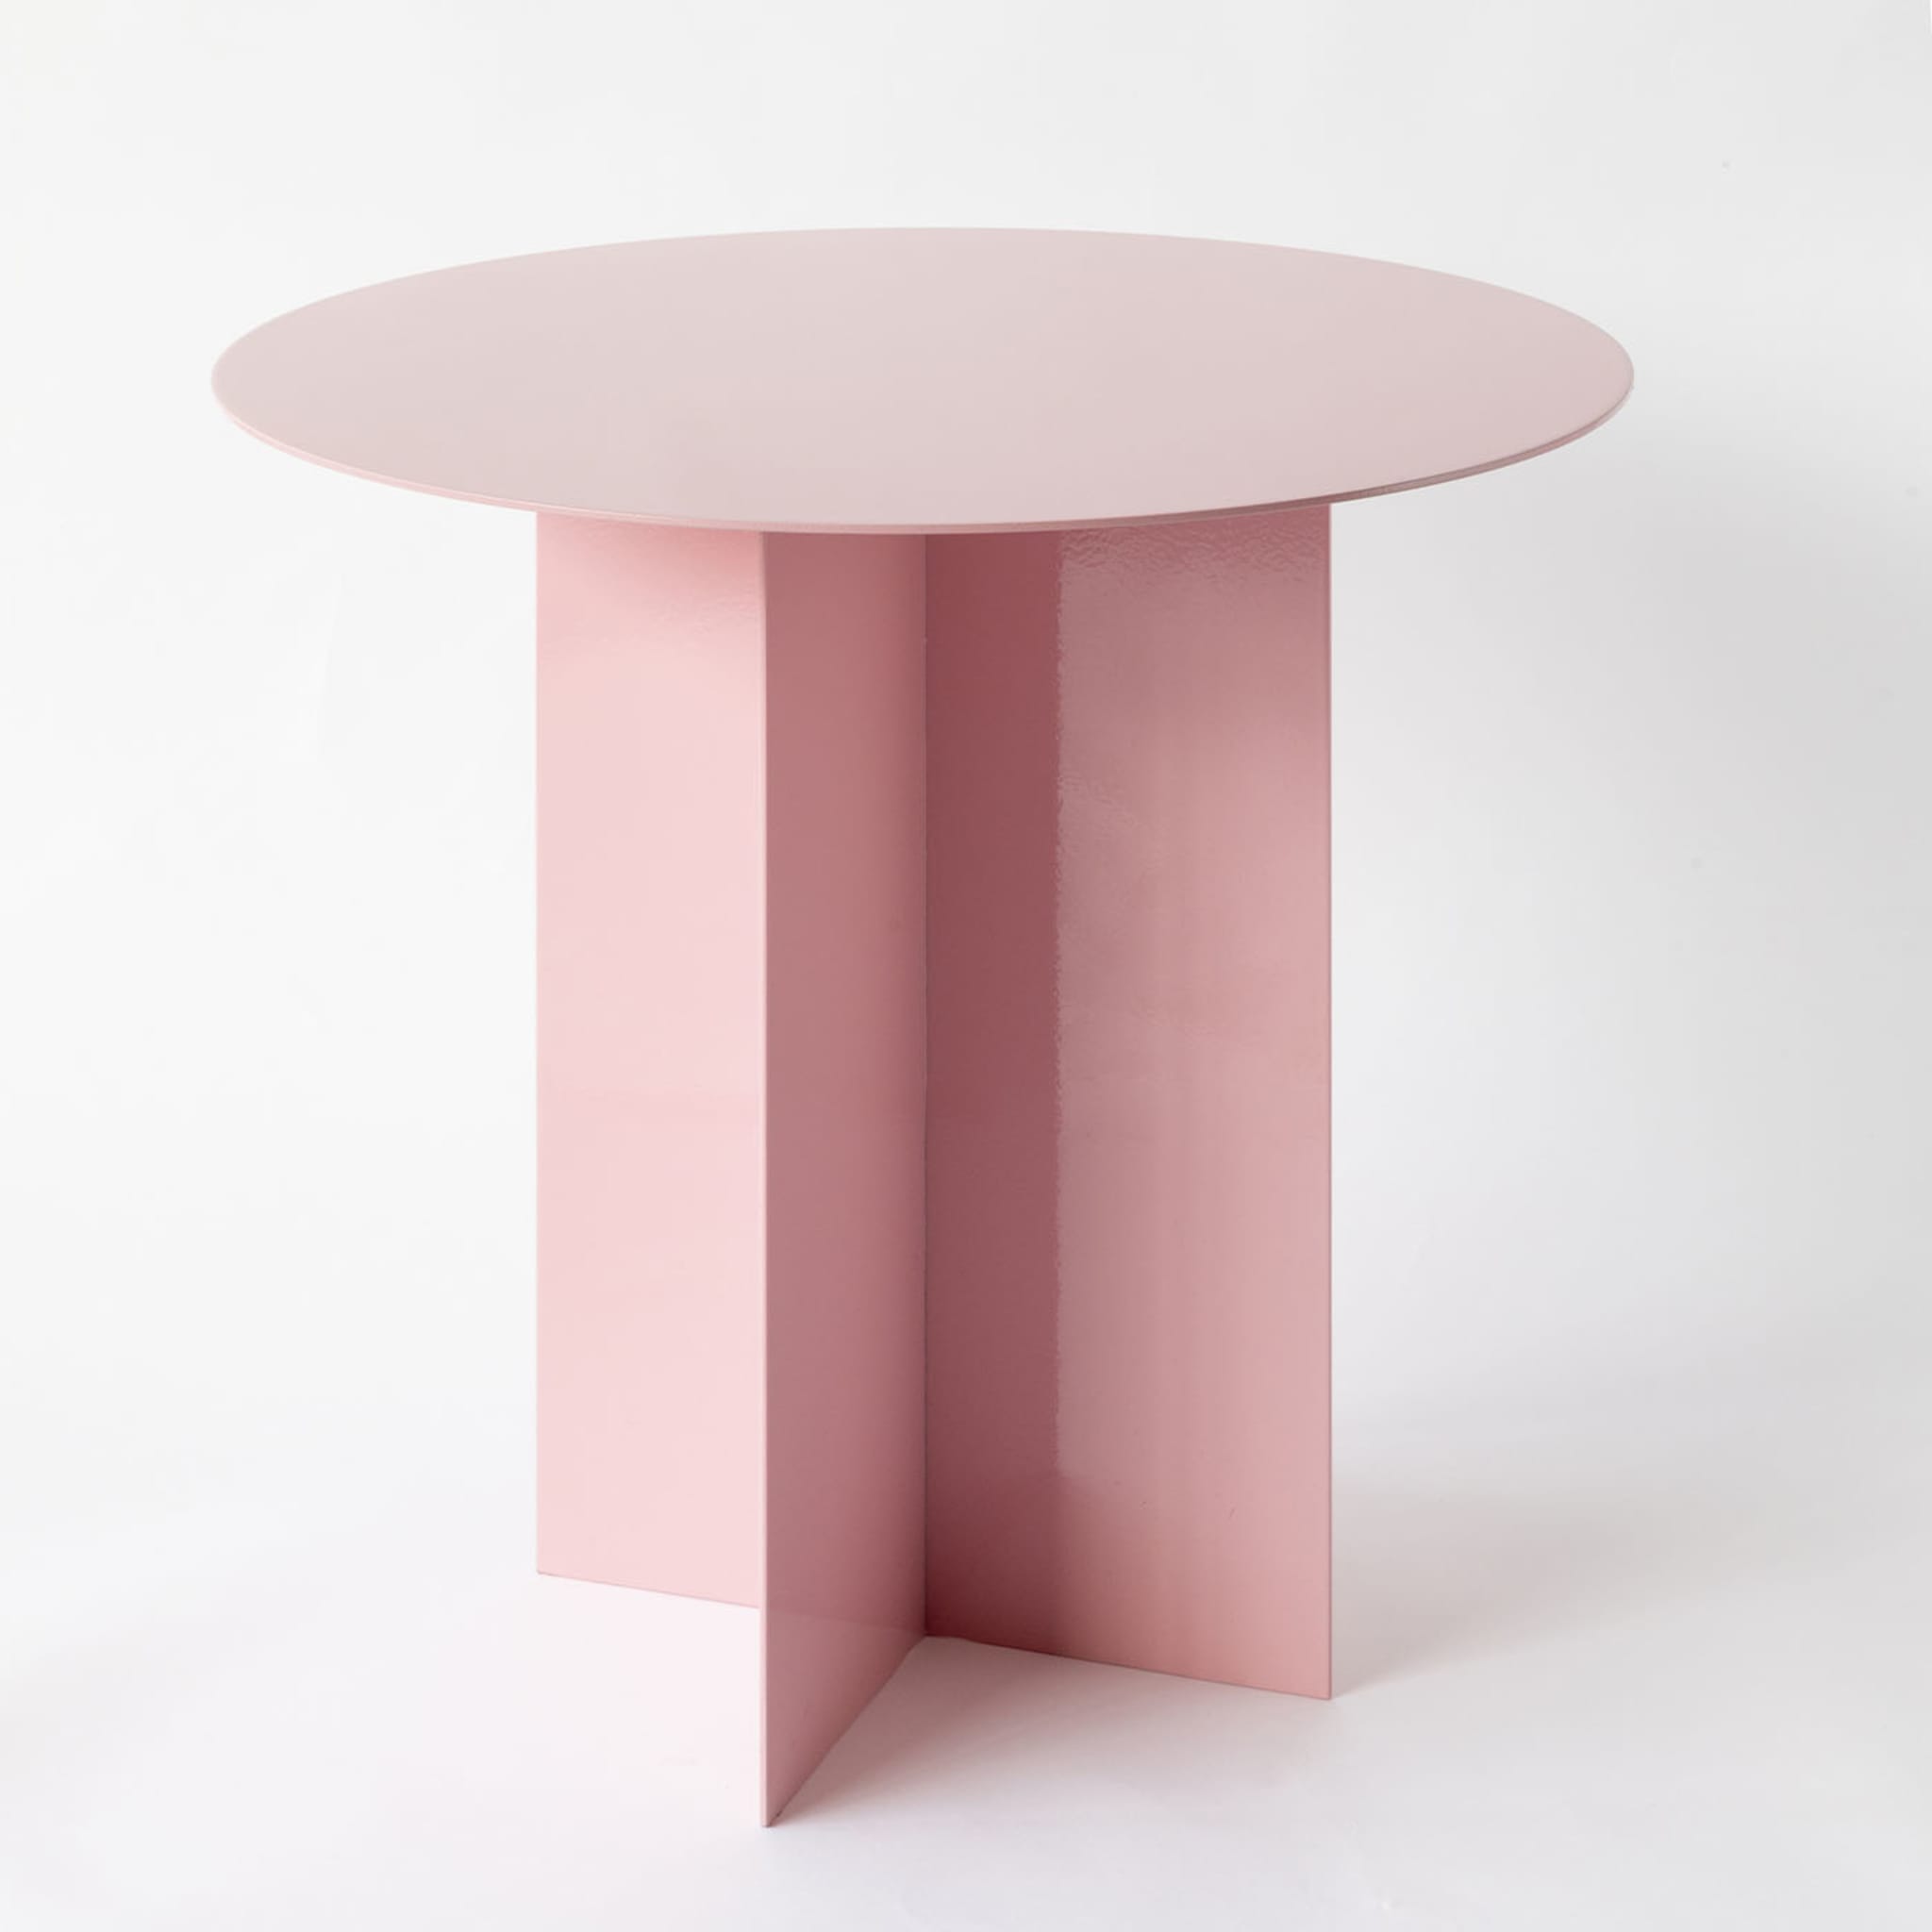 Across Small Pink Side Table  - Alternative view 1